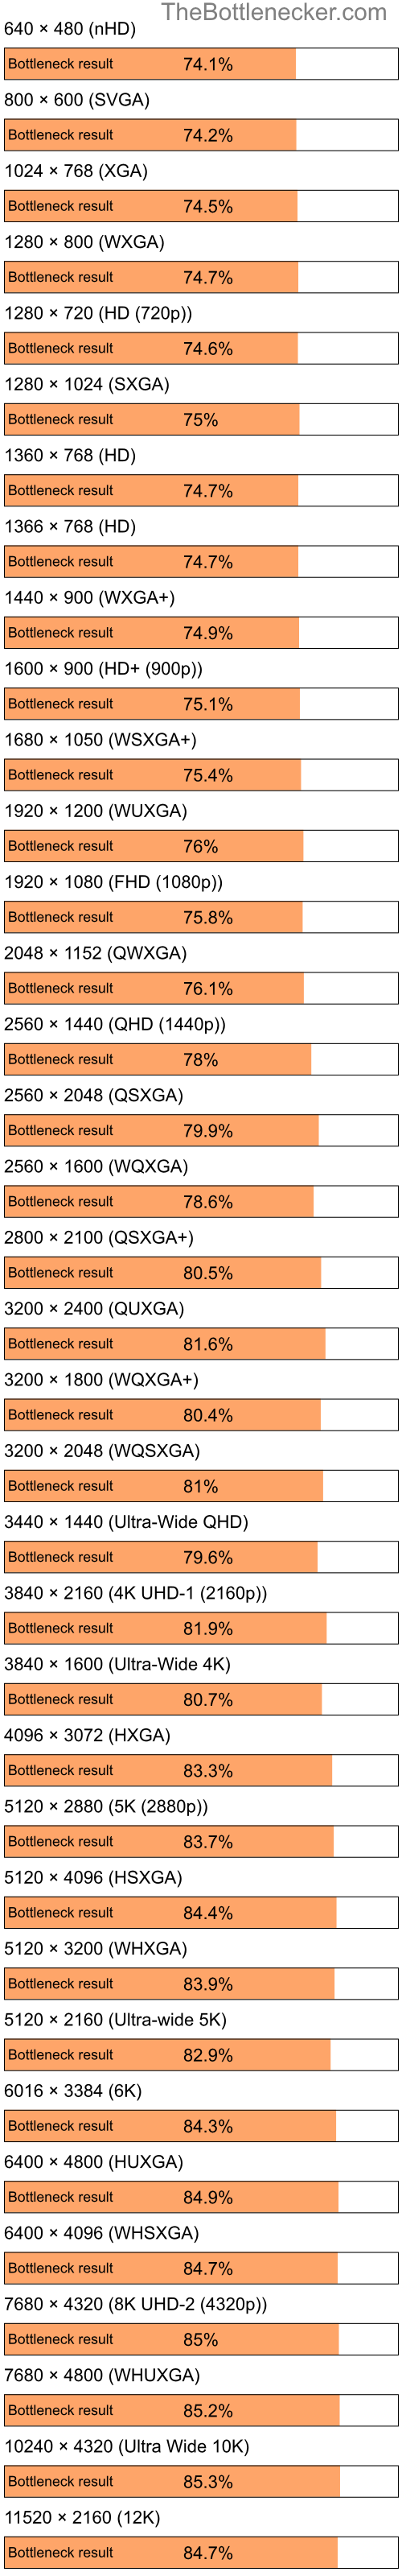 Bottleneck results by resolution for Intel Atom Z520 and NVIDIA GeForce Go 6600 in Graphic Card Intense Tasks